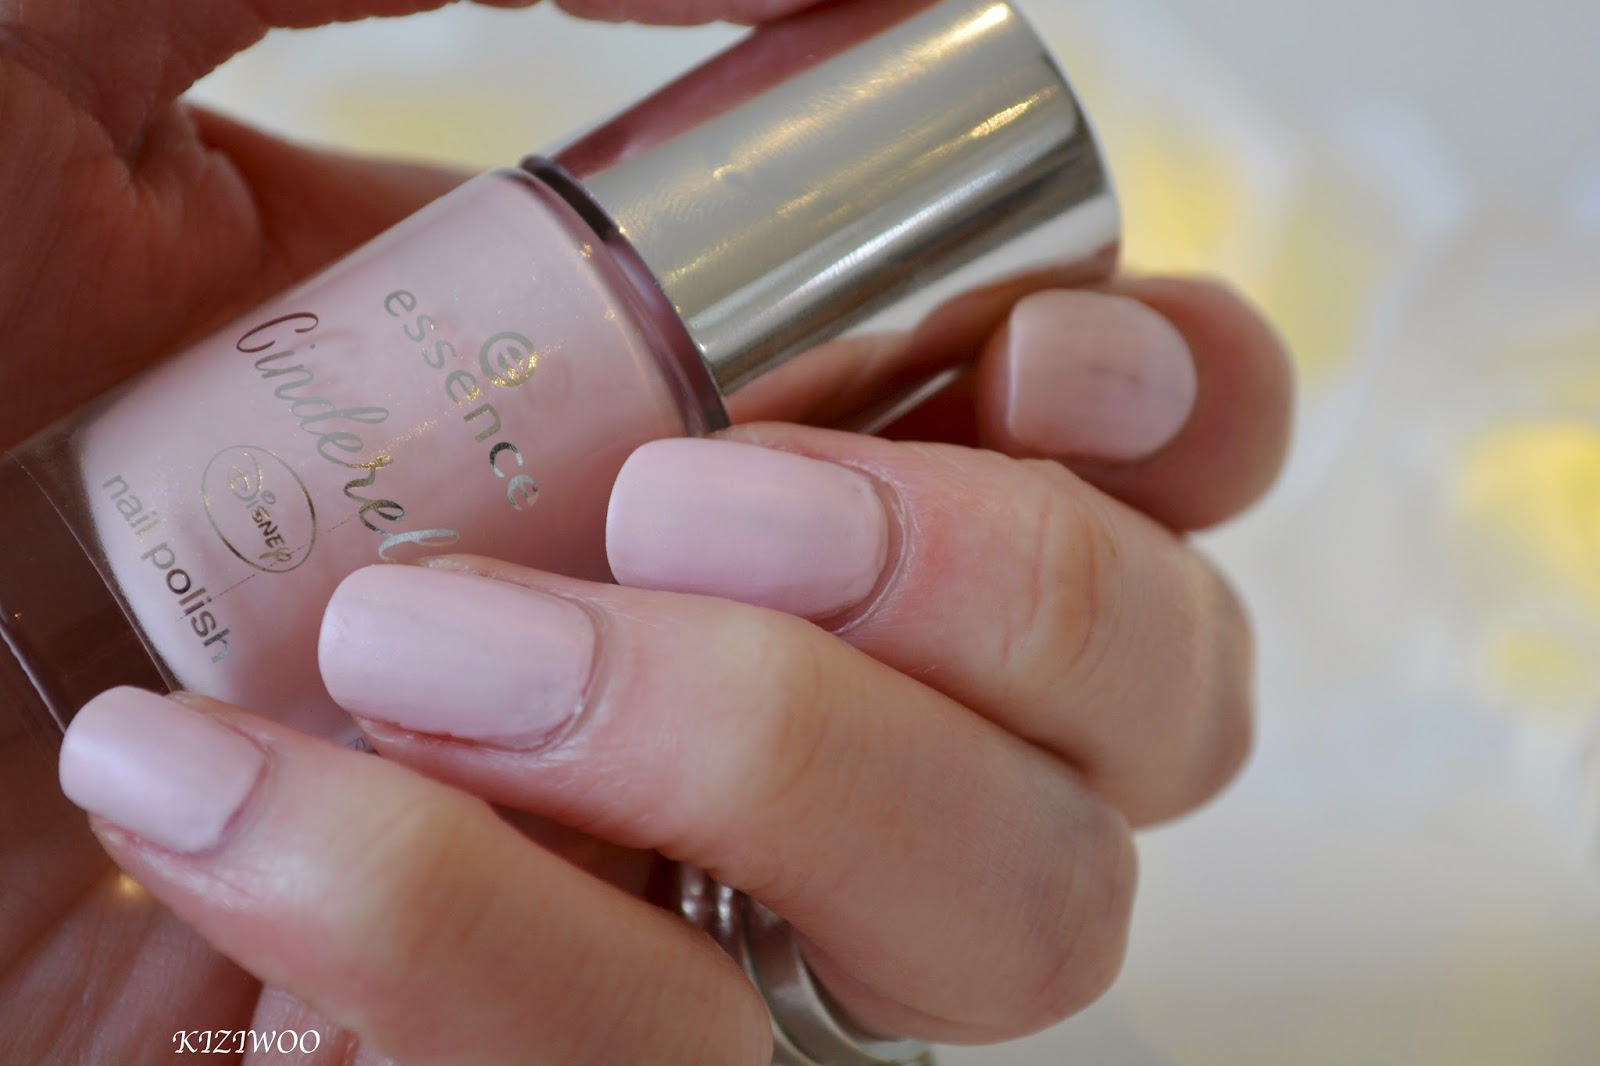 9. Sinful Colors Professional Nail Polish in "Cinderella" - wide 7